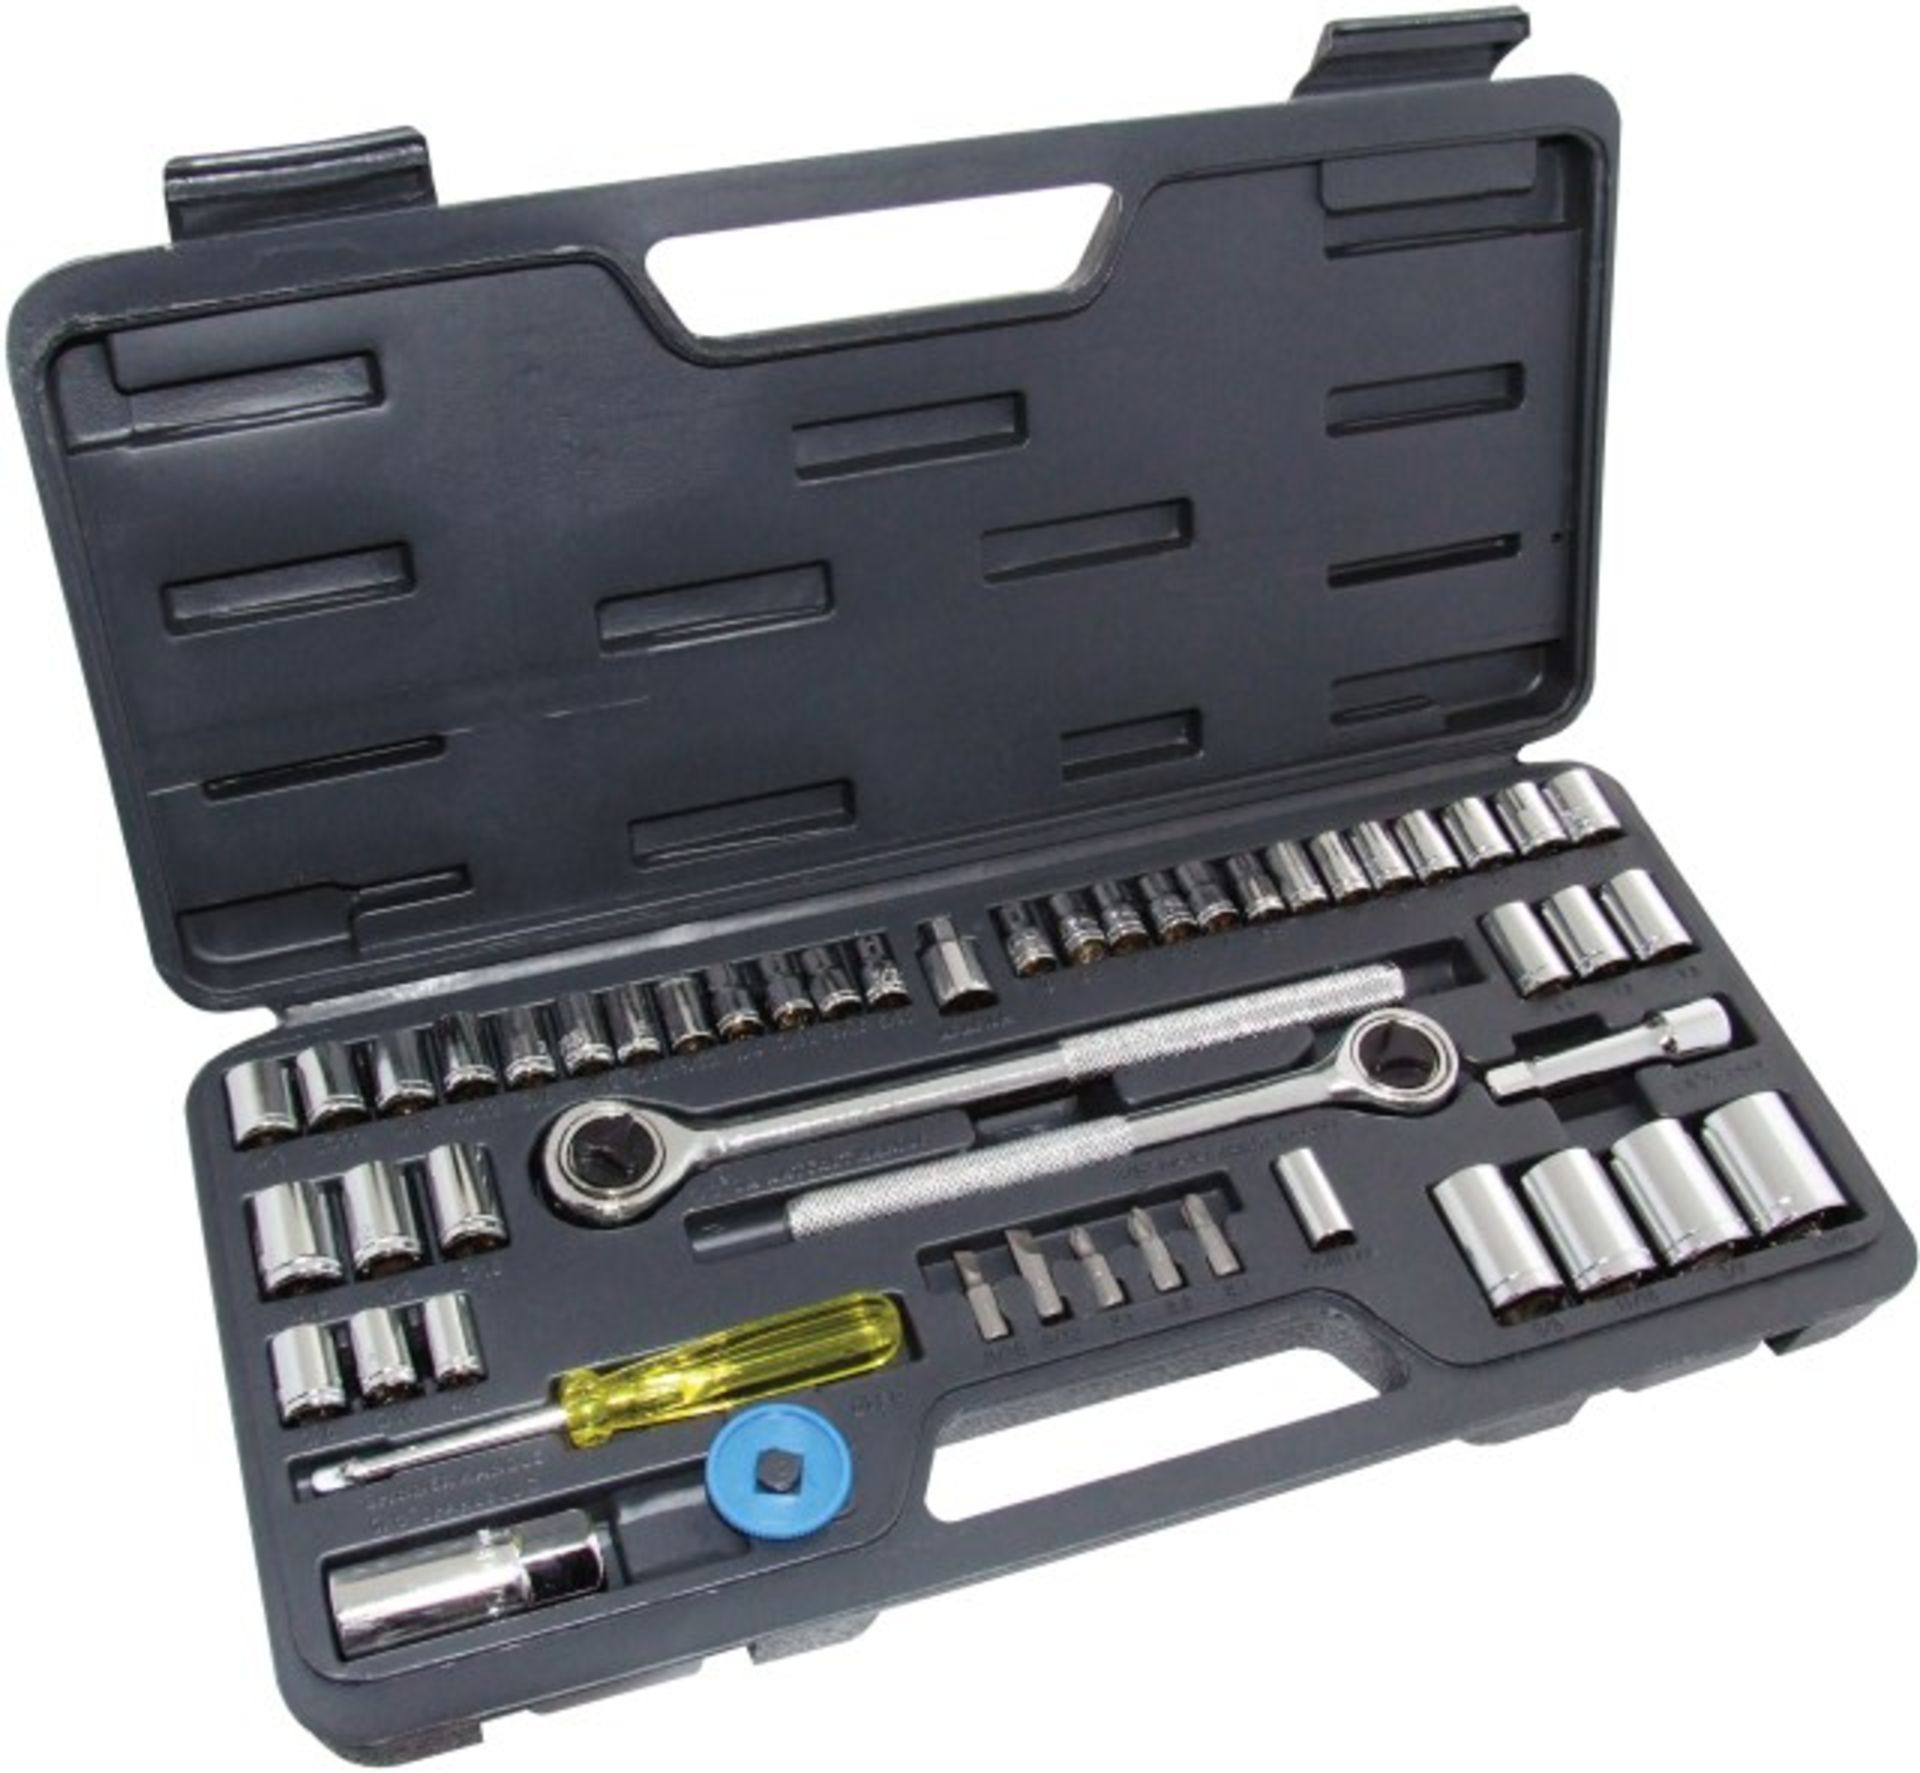 V Brand New 52 Piece Chrome Socket Set With 3 Year Warranty X 2 Bid price to be multiplied by Two